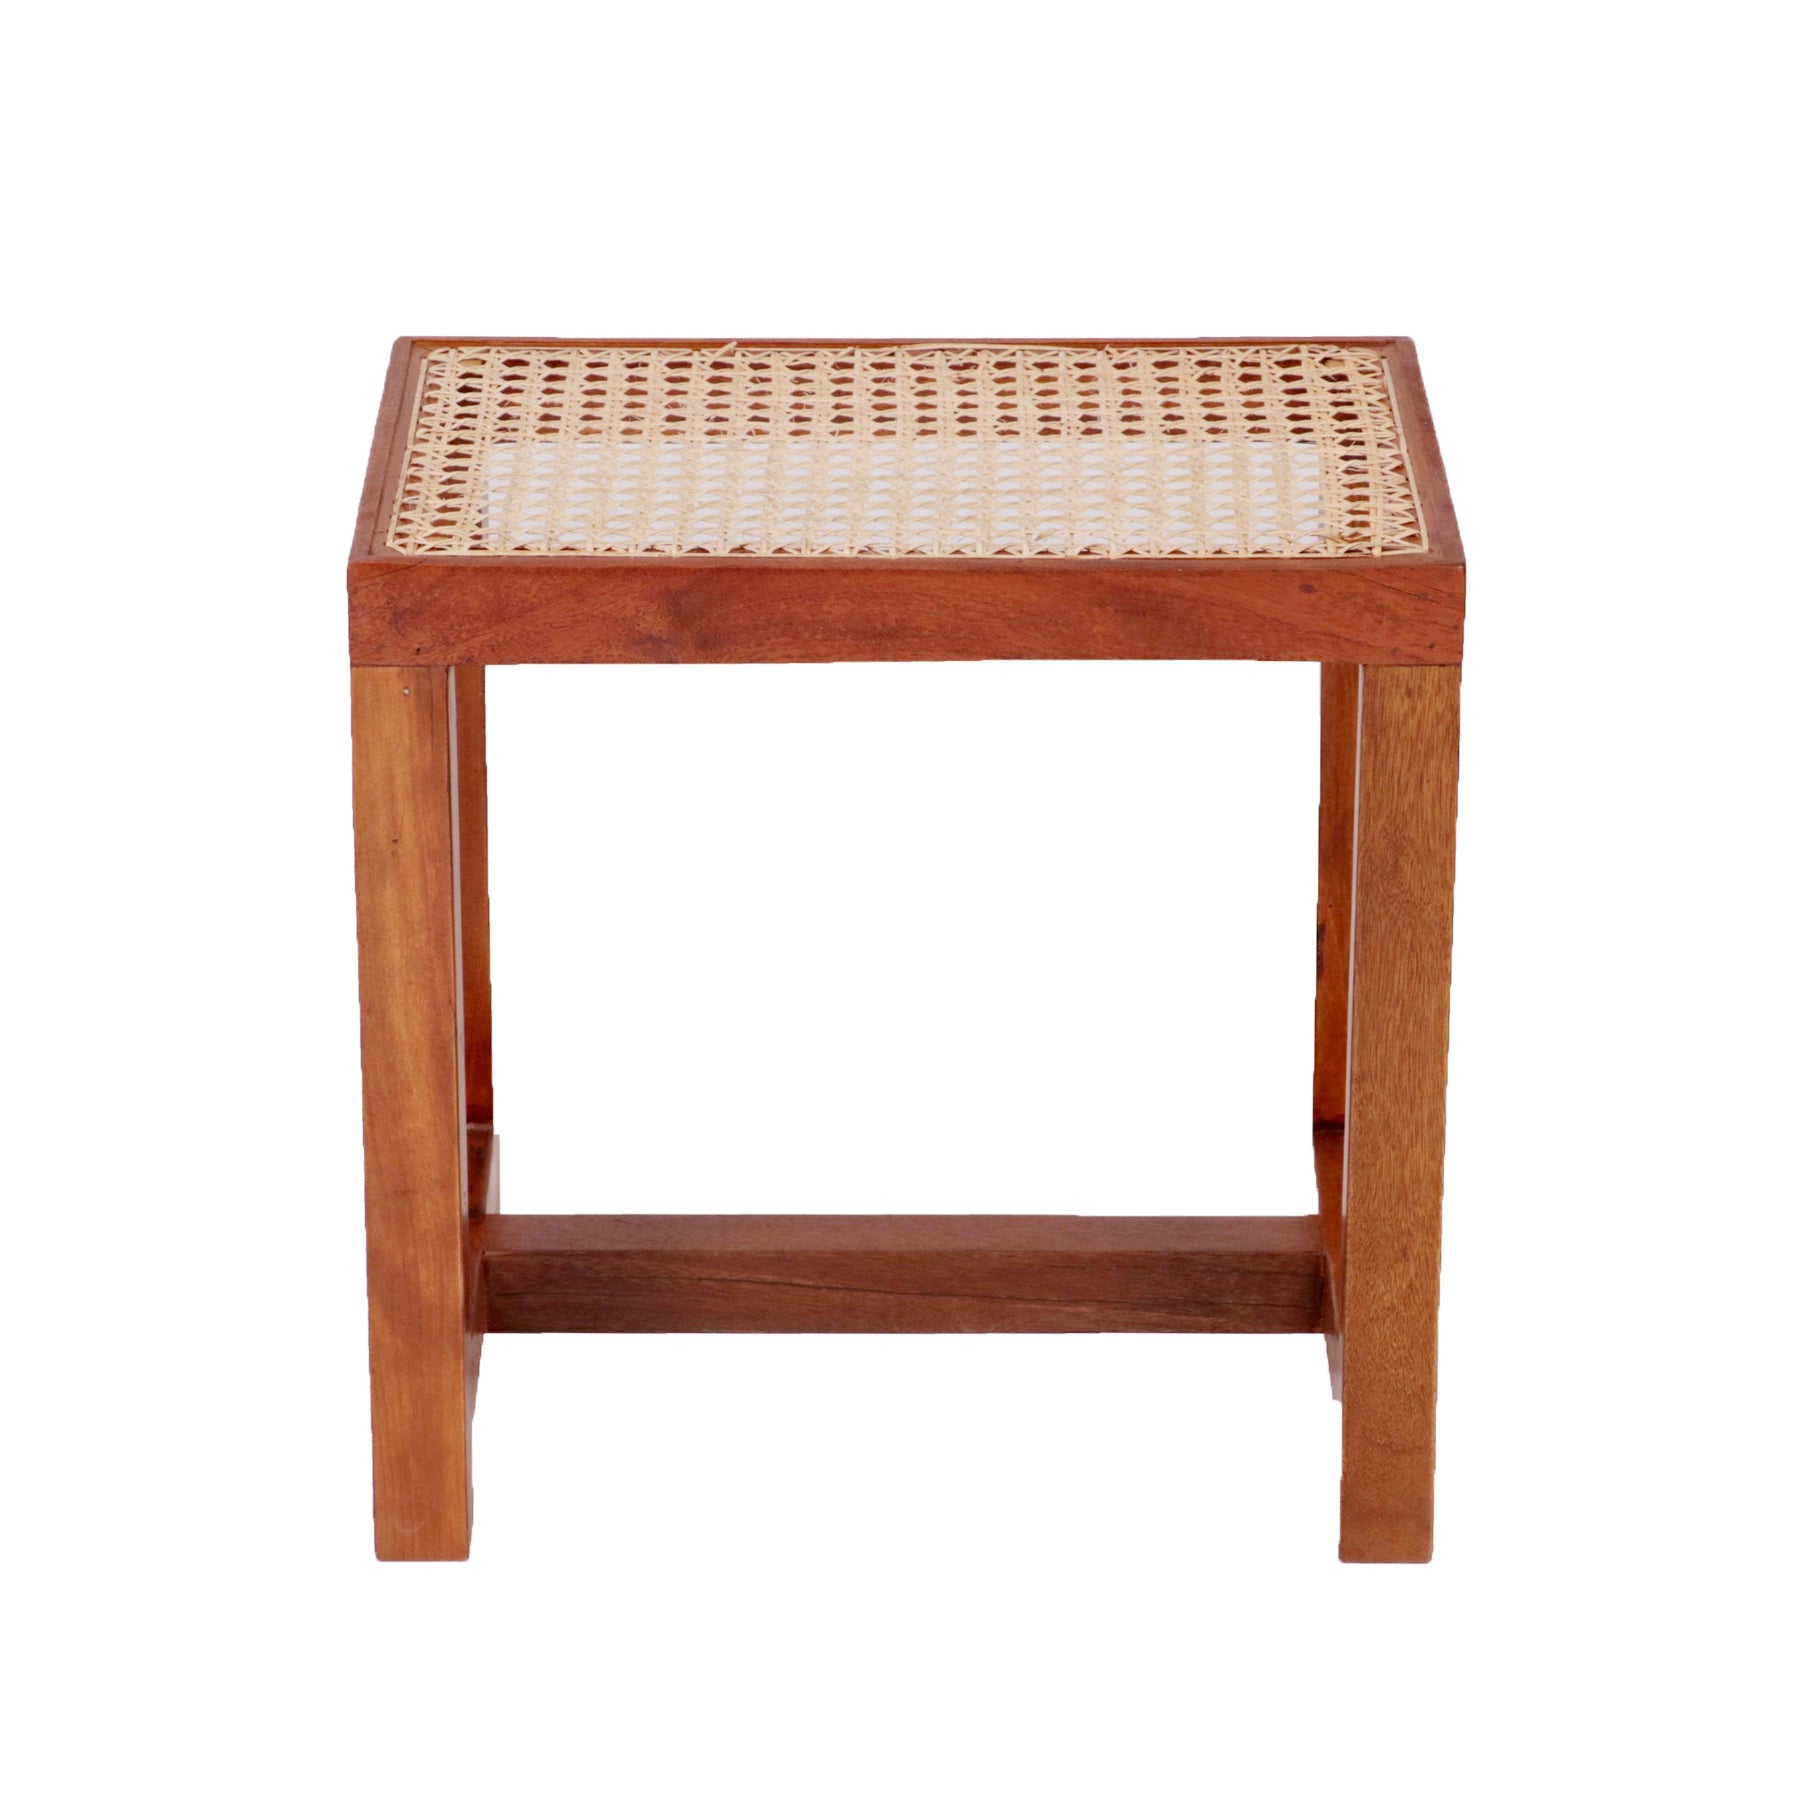 Seating Height Cane Stool Stool